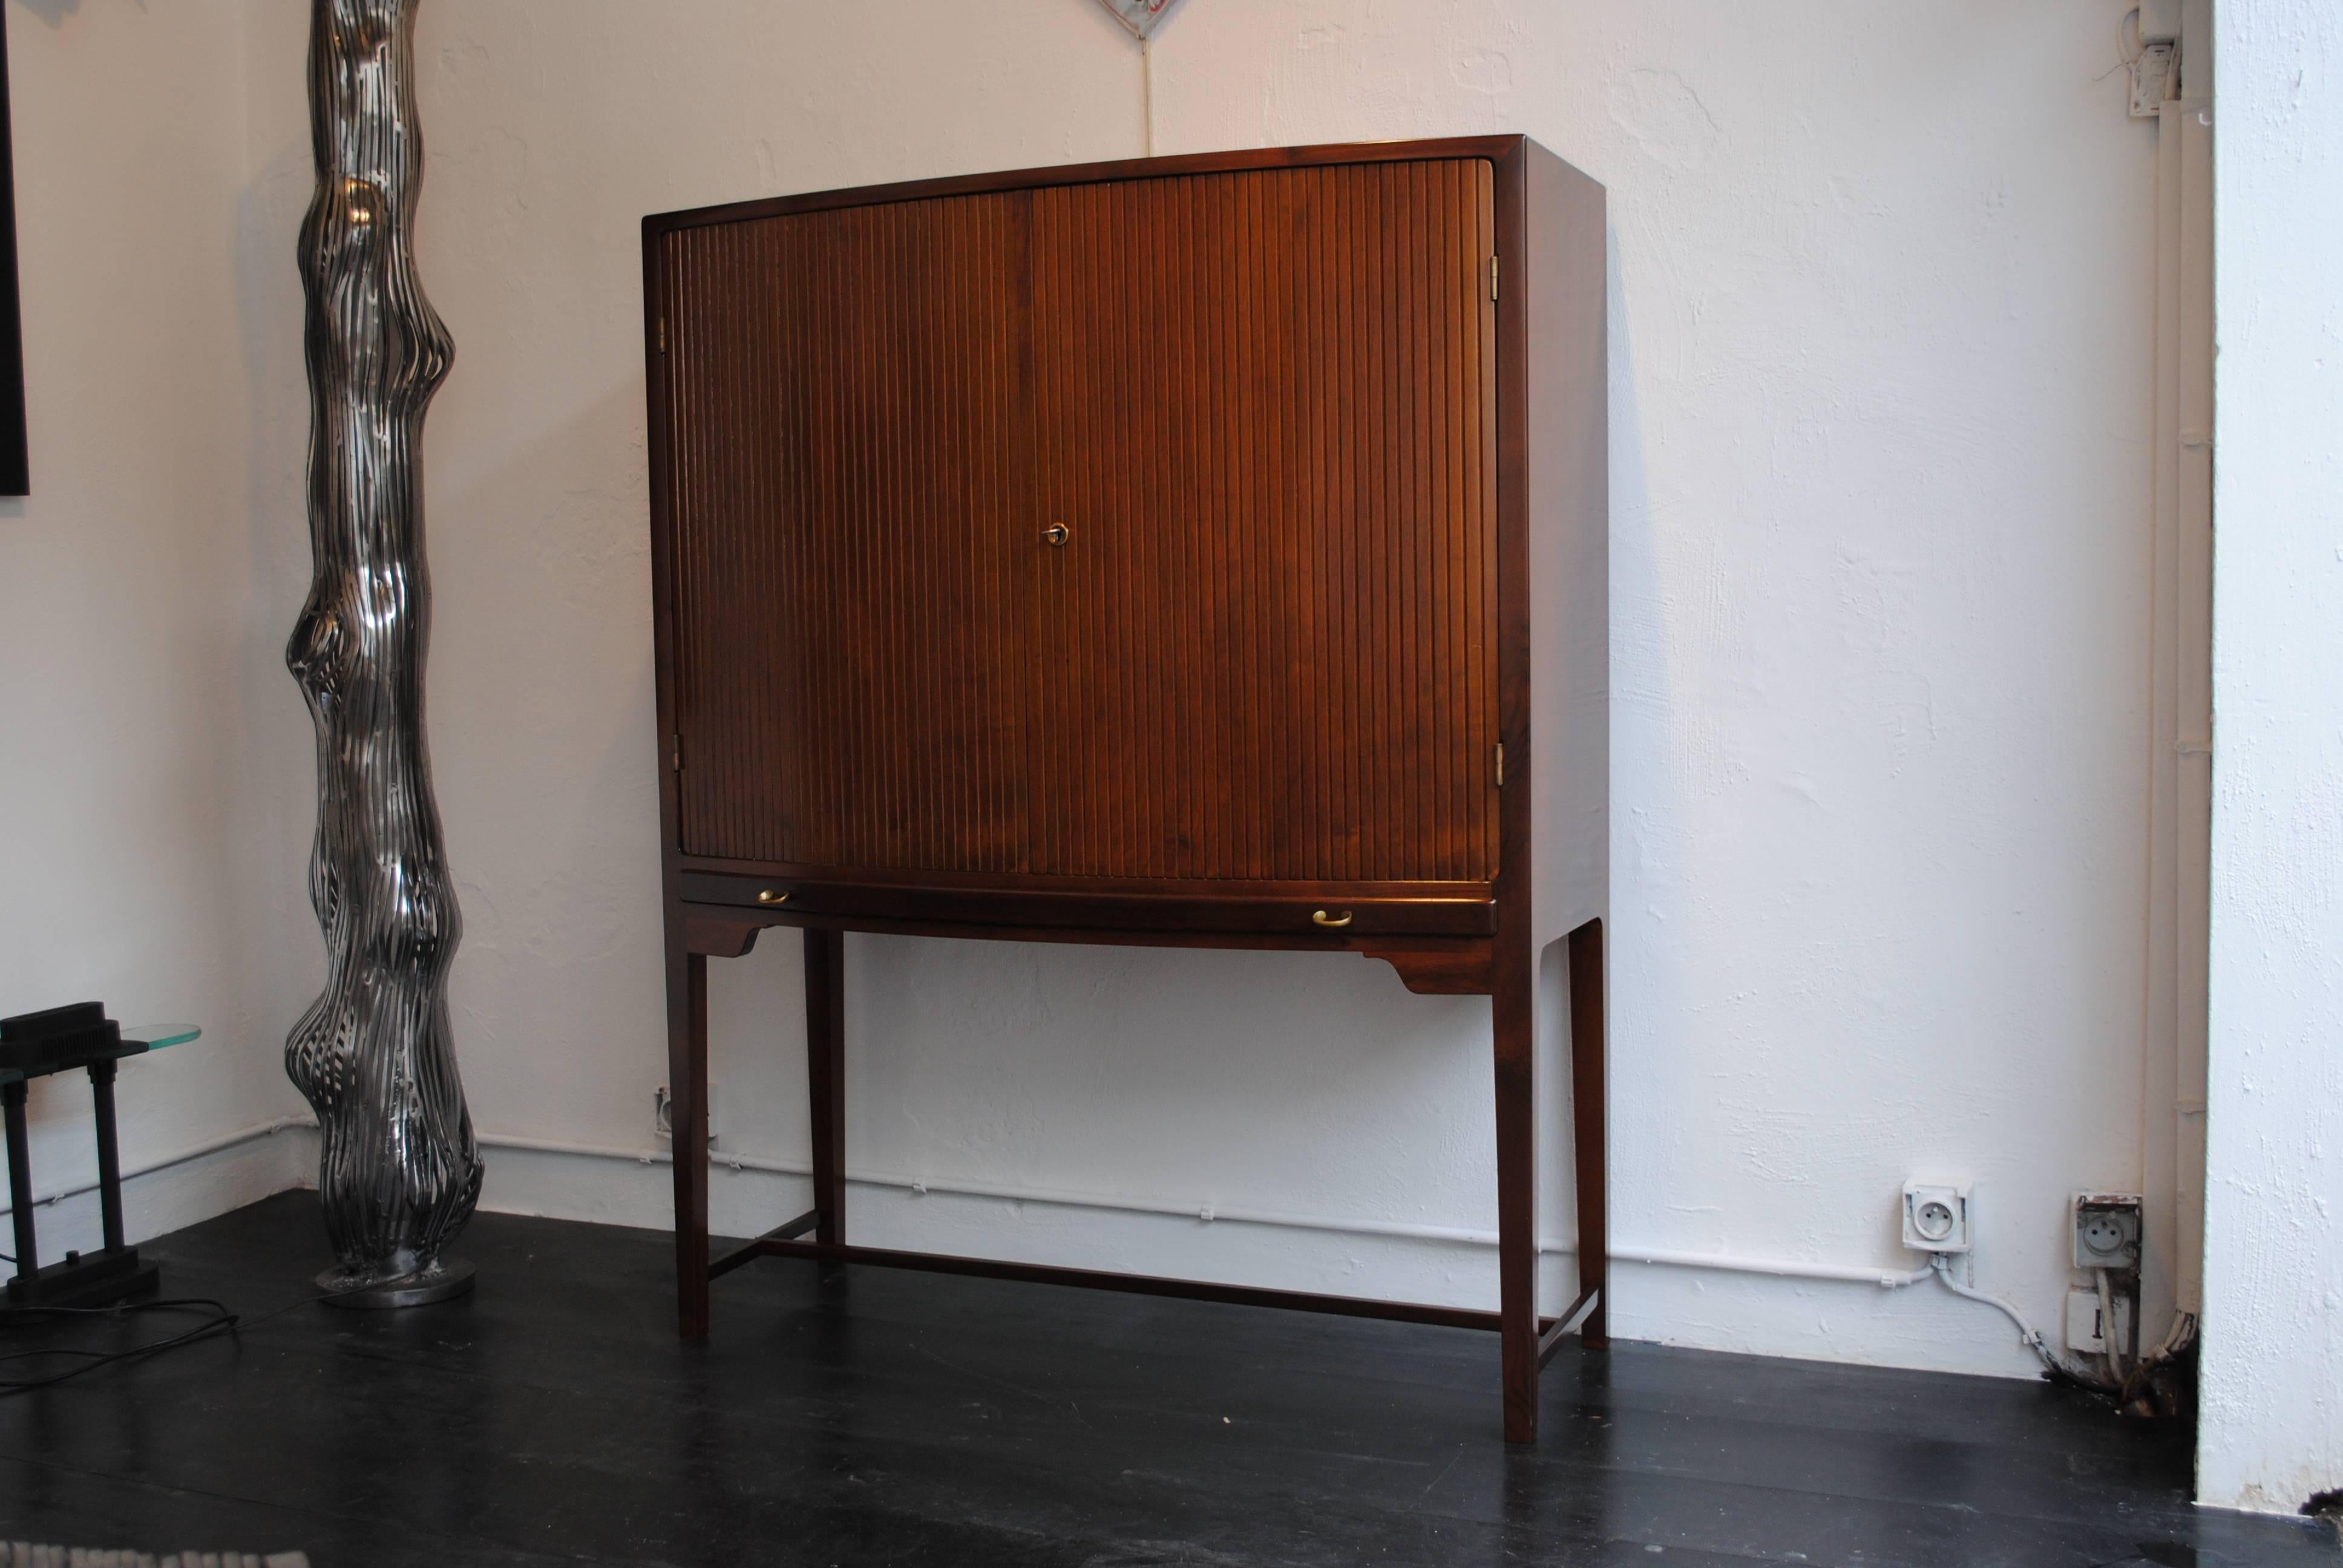 A very elegant mahogany cabinet by Ole Wanscher for Illums Bolighus (original metal label on the back).

The cabinet has been entirely restored and is in mint condition. A rare example of pure 1940s Danish design.